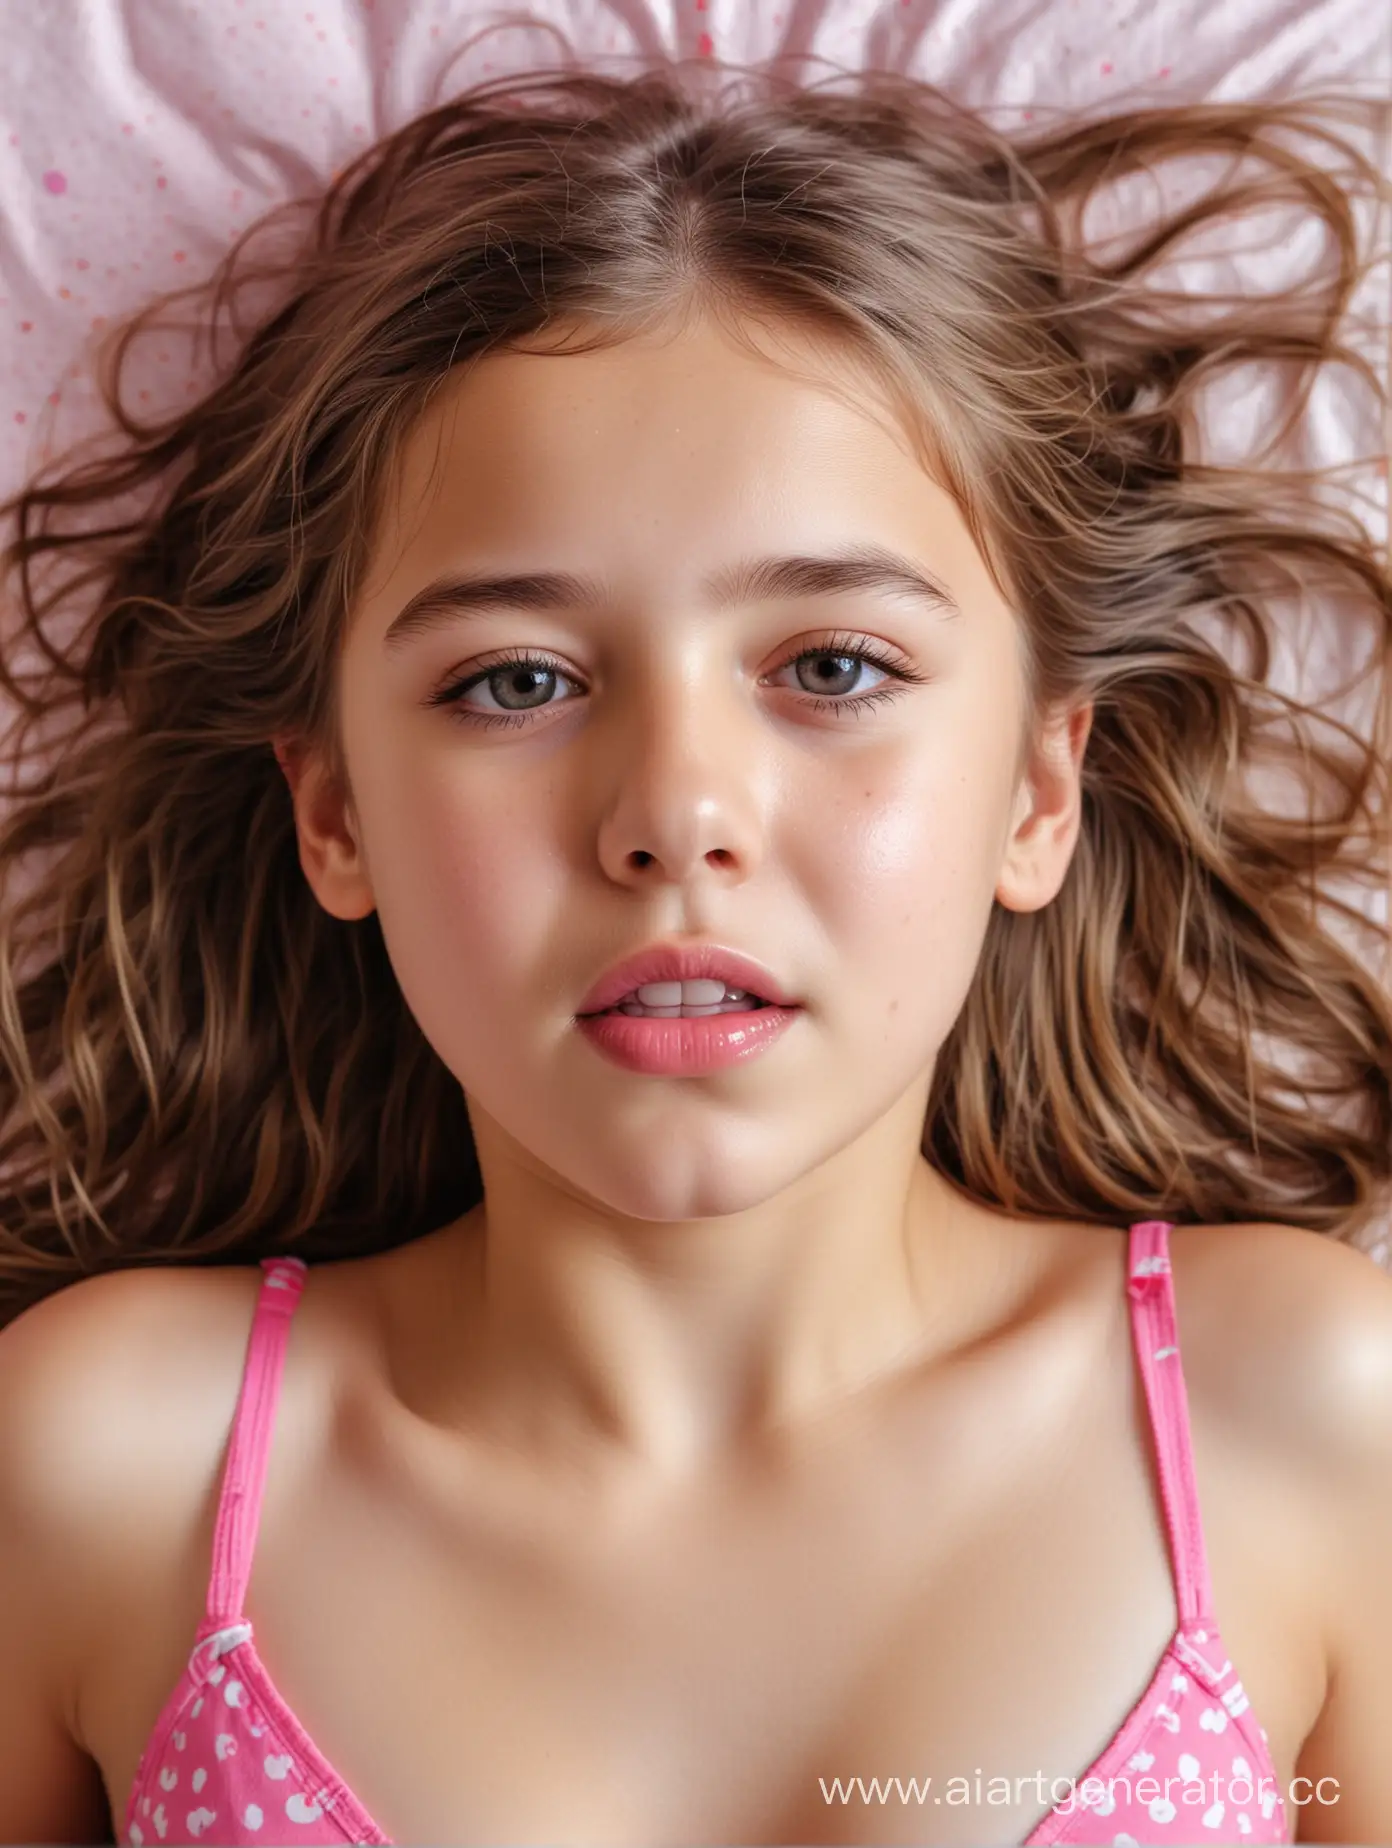 Young-Girl-in-Pain-Lying-in-Bedroom-Top-View-with-Wet-Hair-and-Pink-Lips